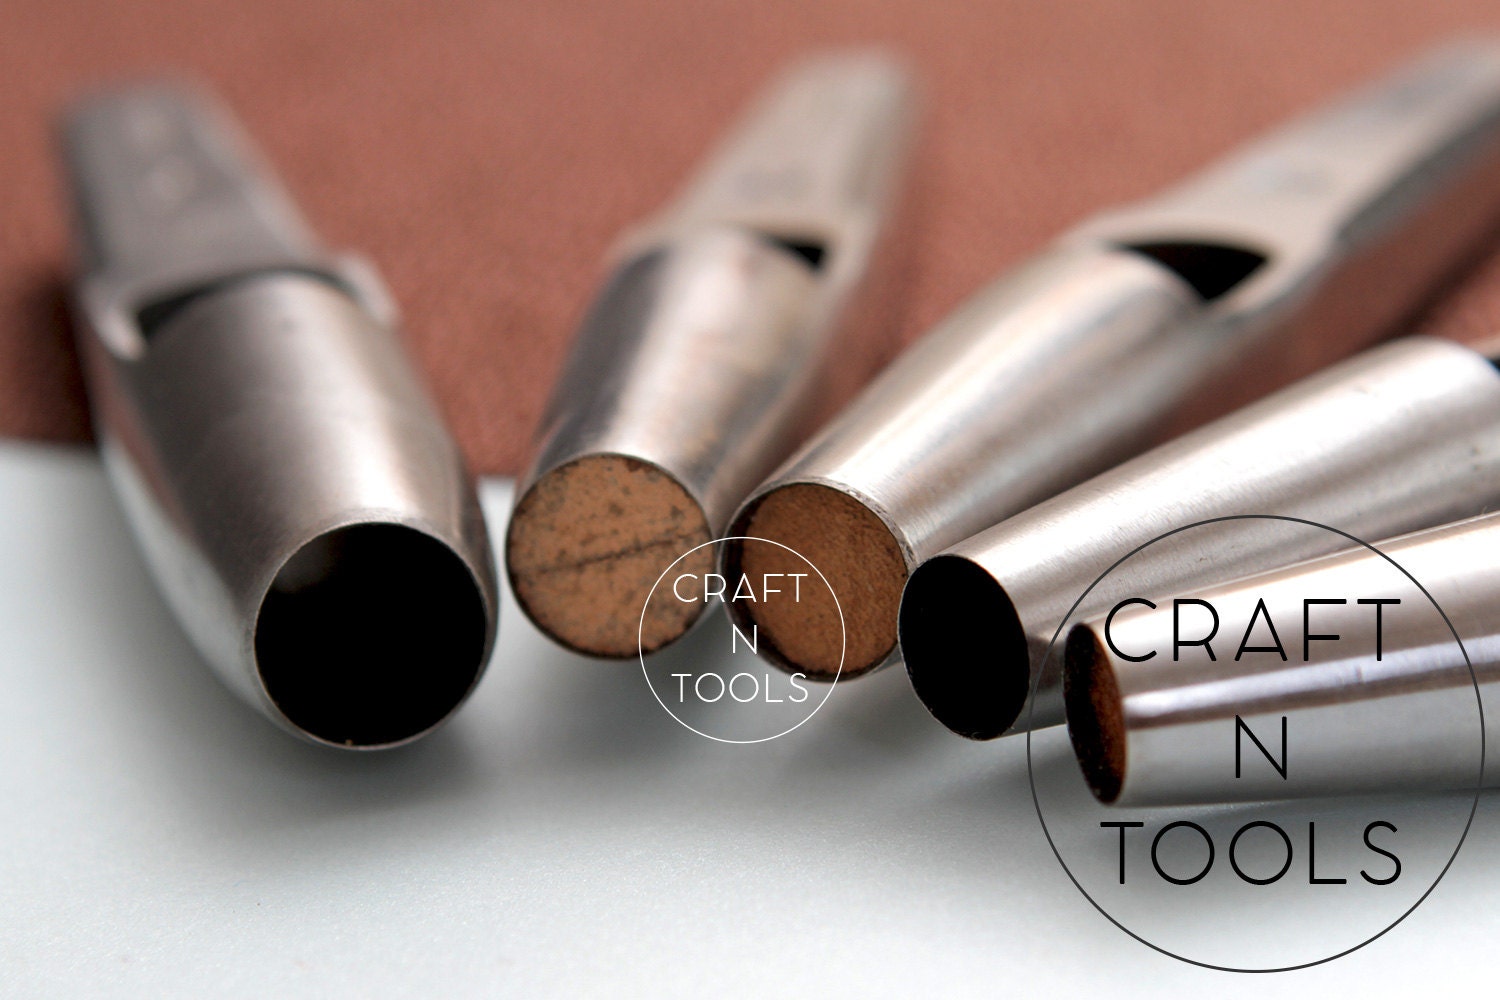 Leather hole punch tips (1 - 5mm), vergez blanchard, craftntools